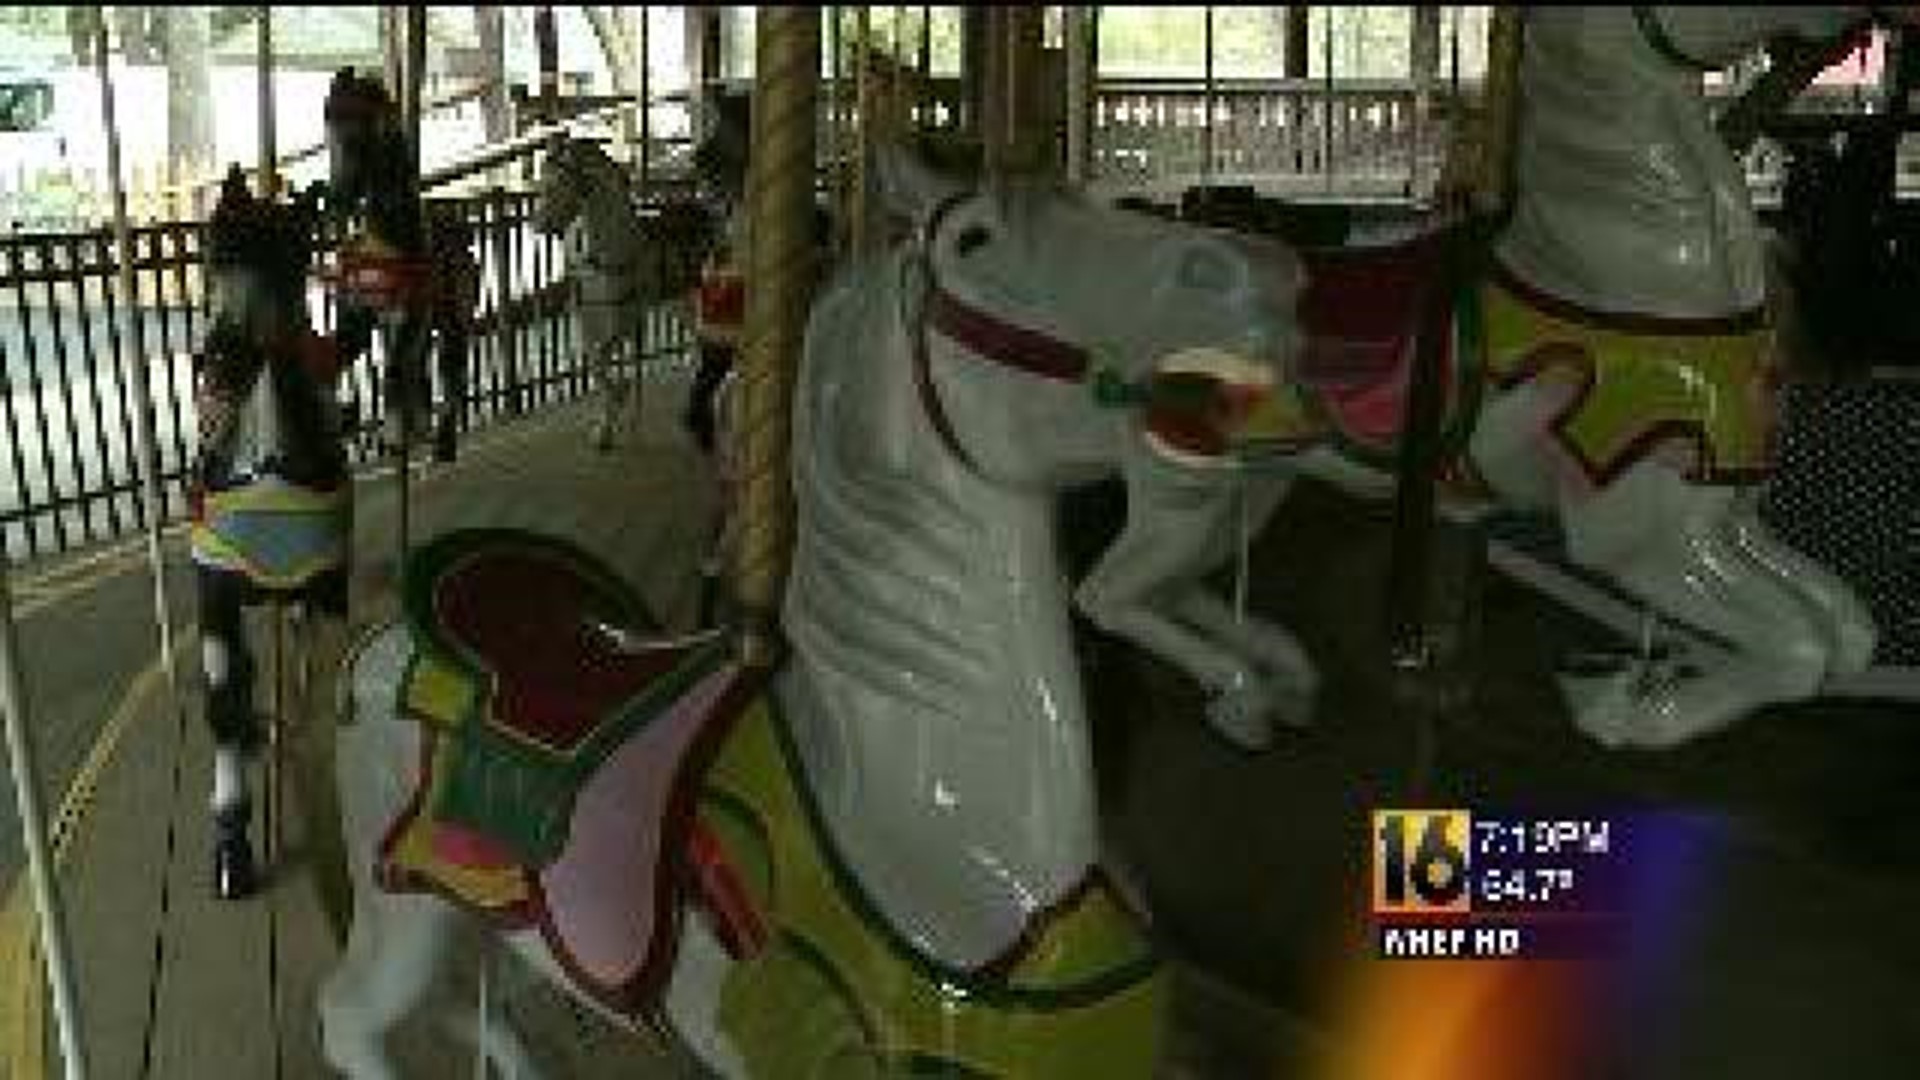 Staff Prepares Knoebels for Opening Day